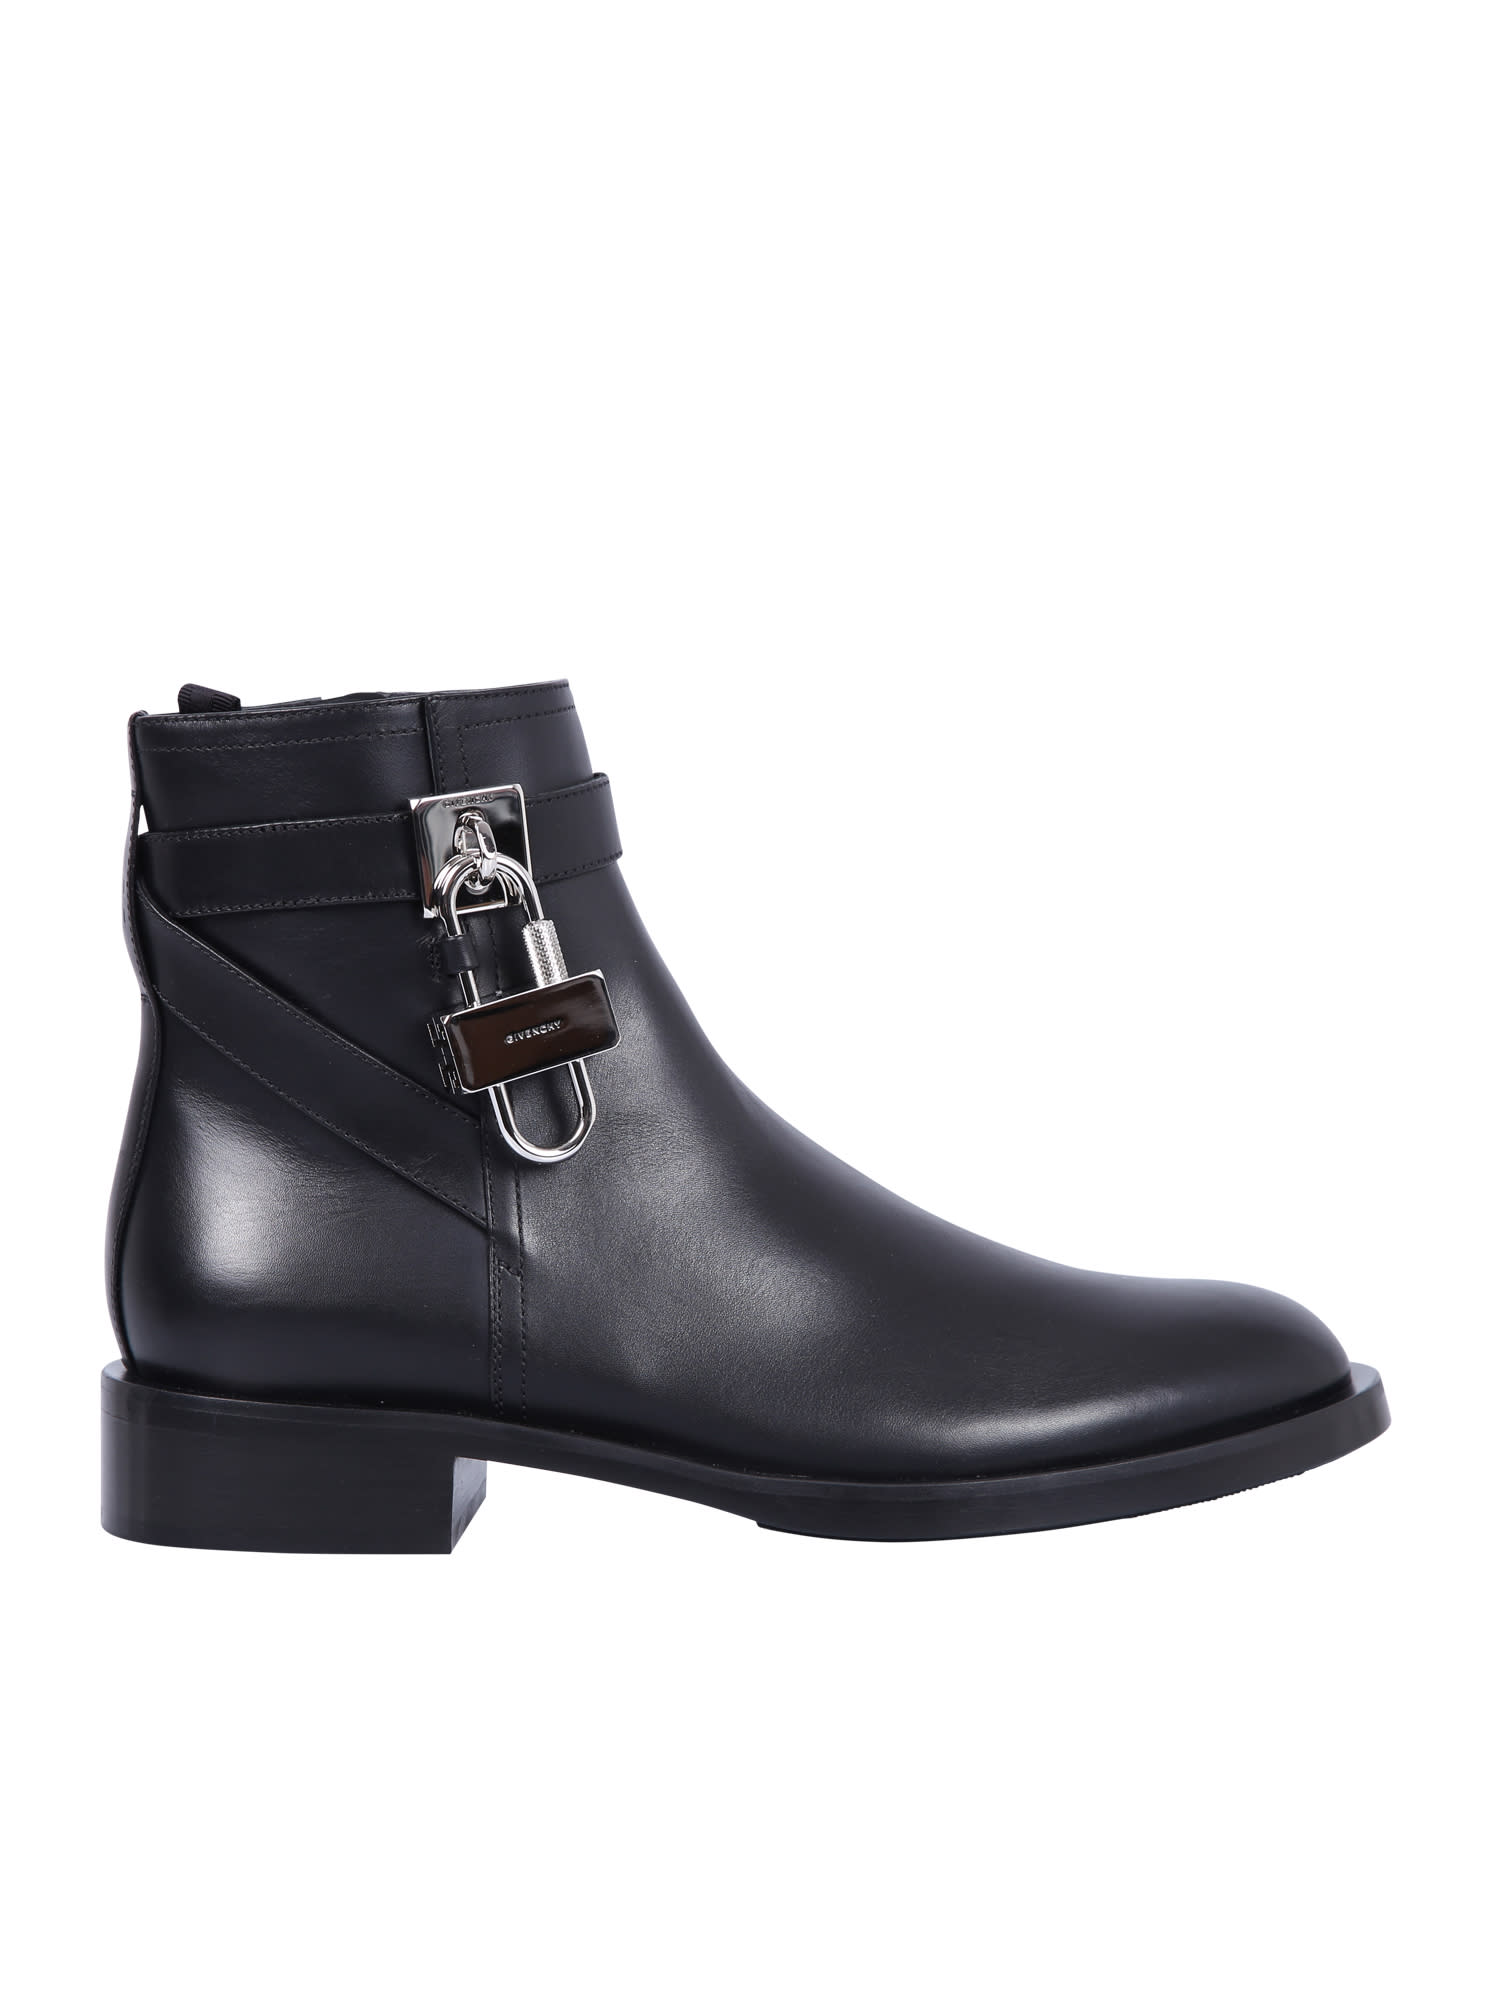 Buy Givenchy Ankle Boots online, shop Givenchy shoes with free shipping